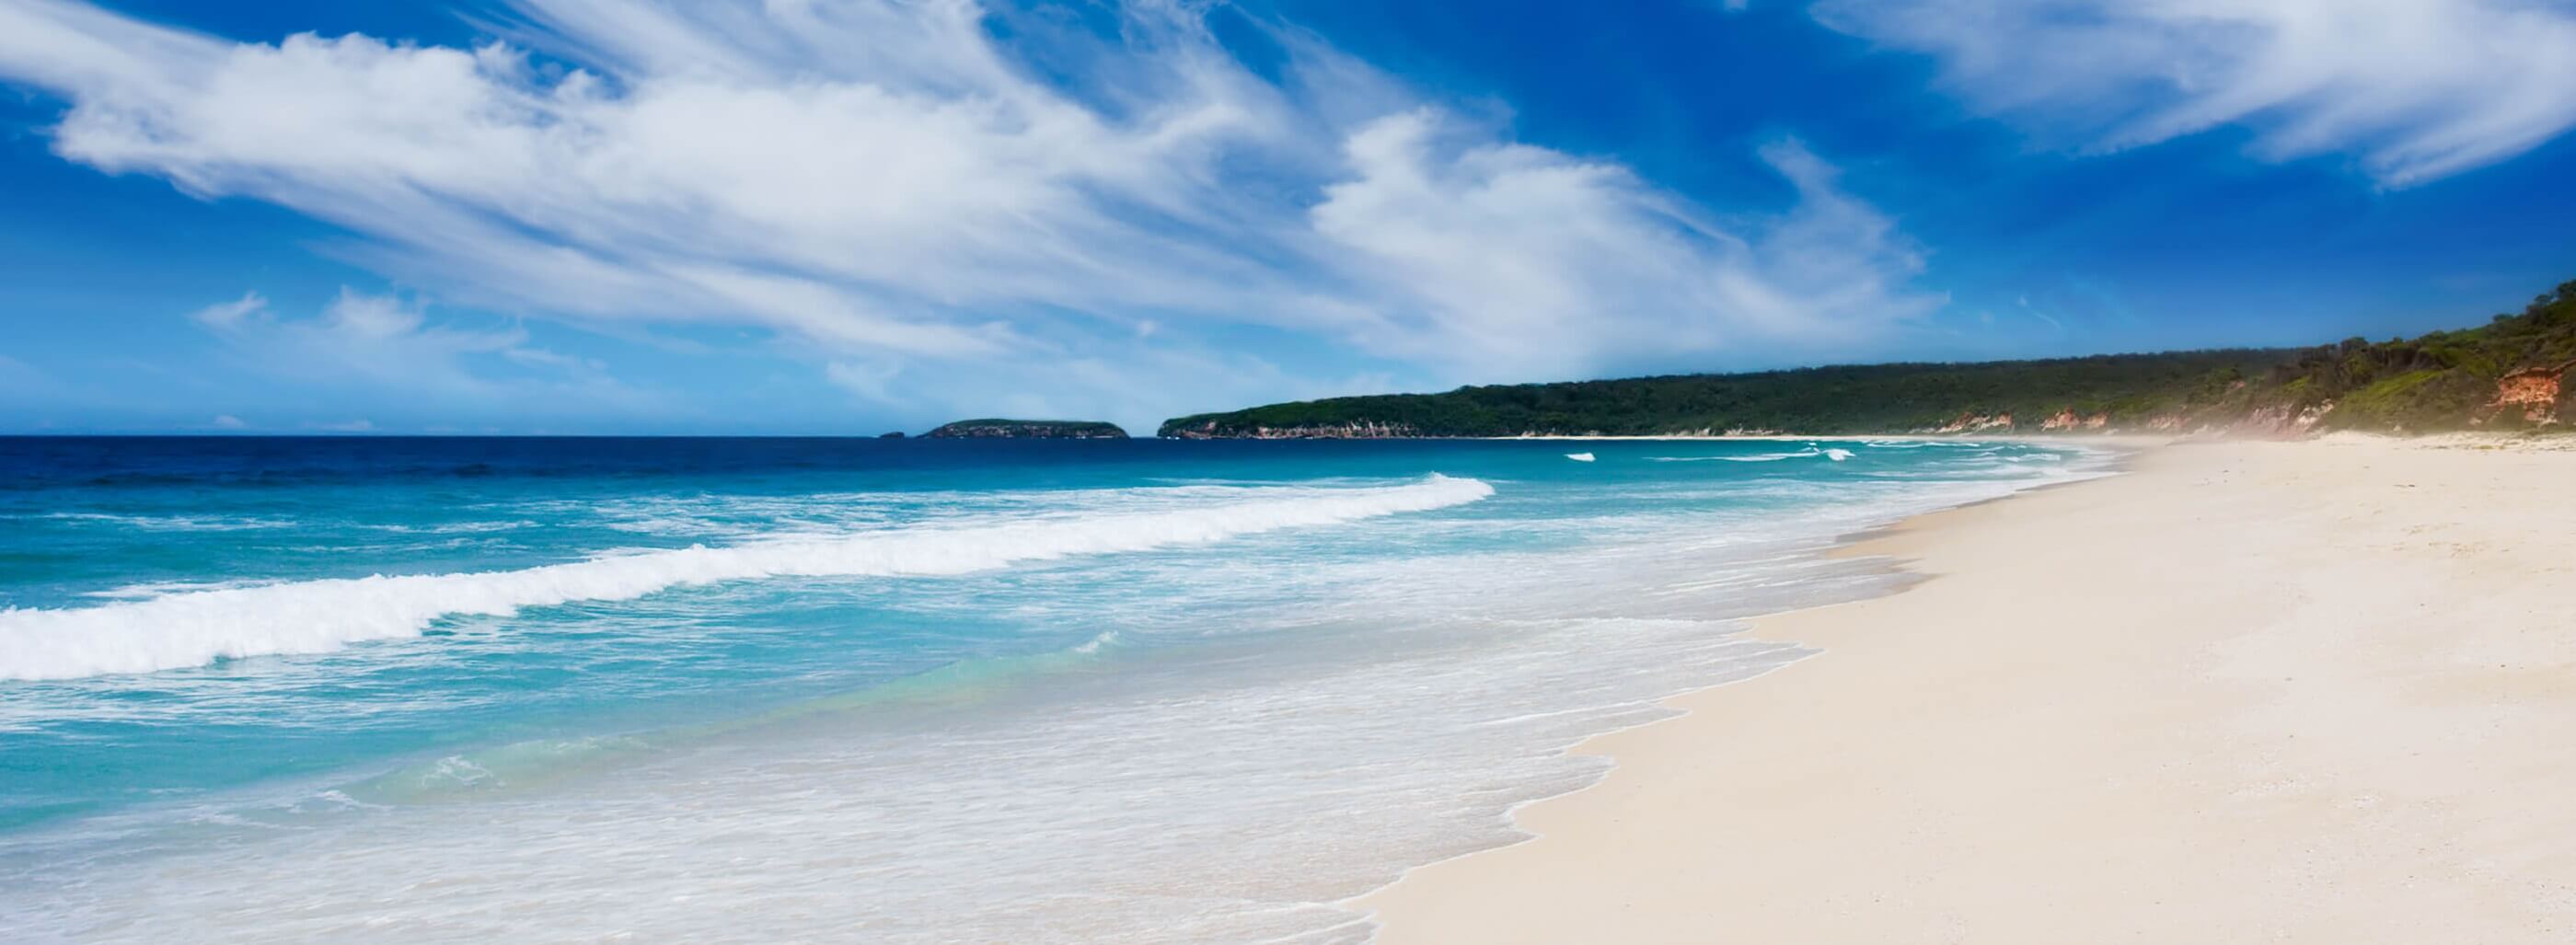 How long should you stay on Fraser Island?